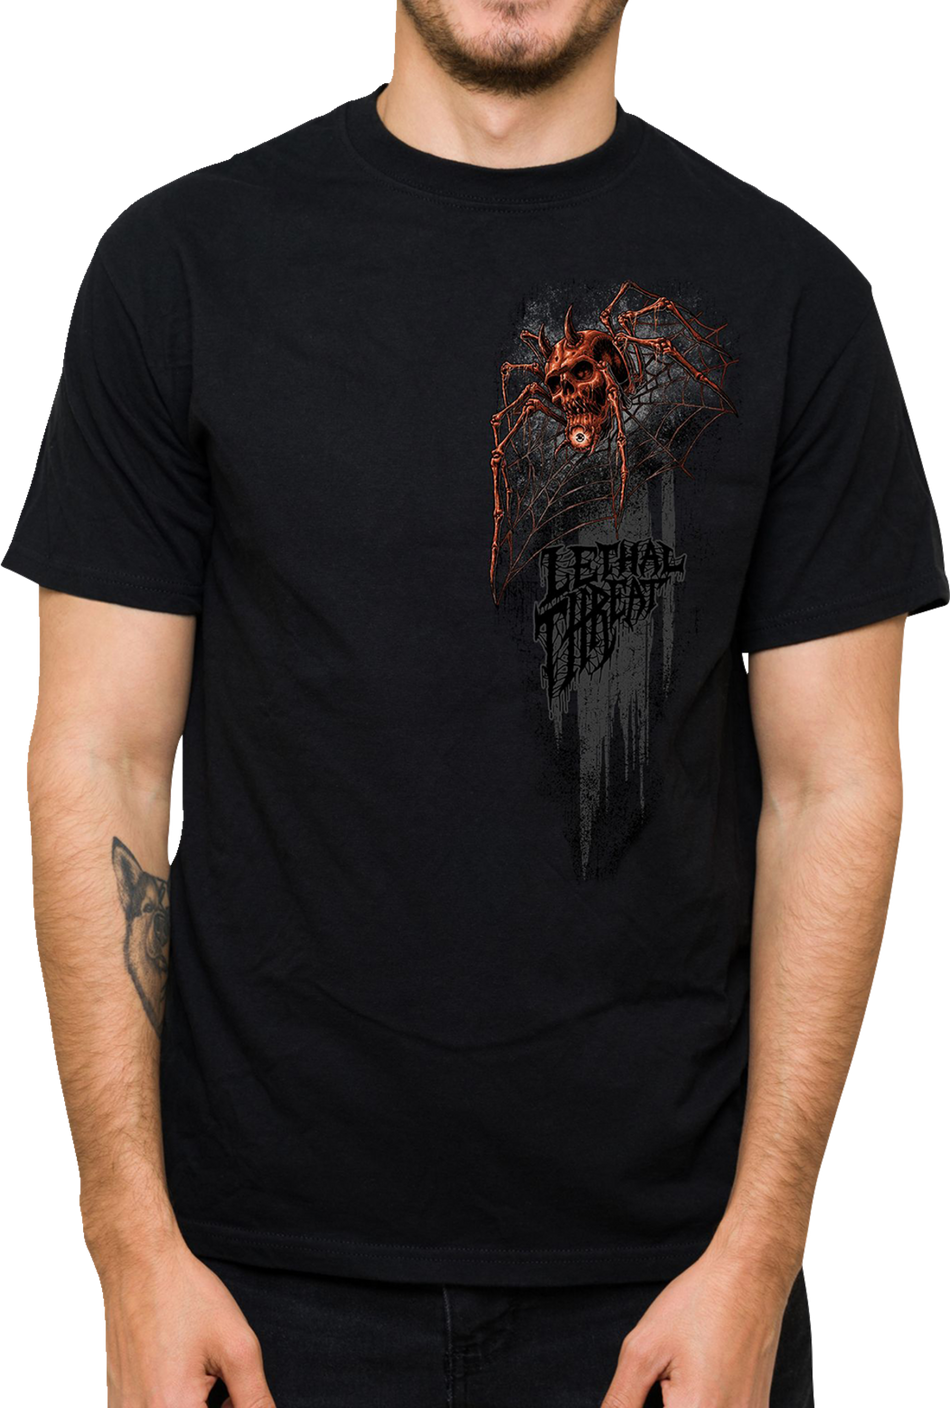 LETHAL THREAT Know Your Darkness T-Shirt - Black - Large LT20902L